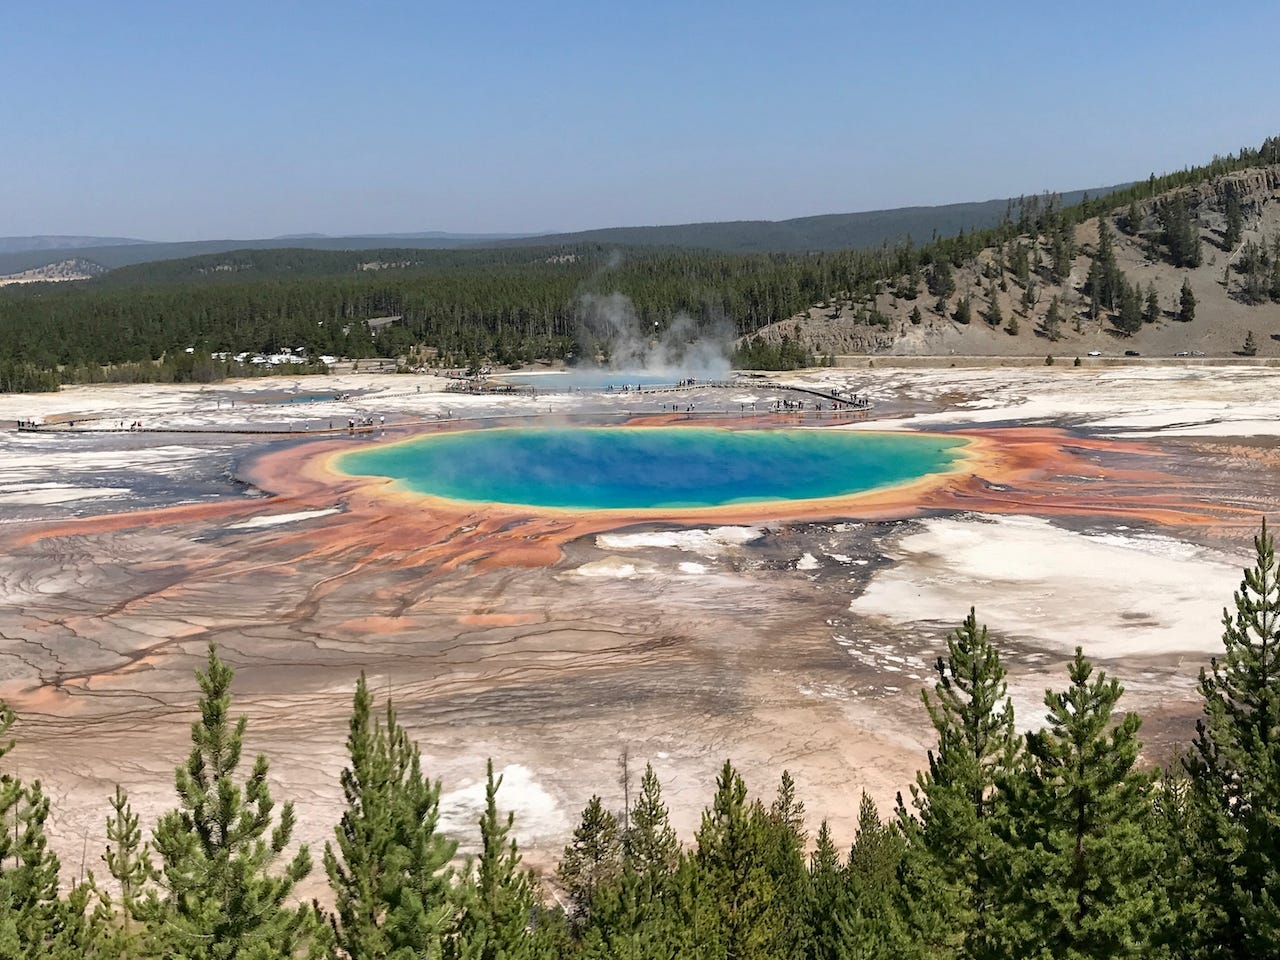 <p>The Smiths' favorite activities in<a href="https://www.businessinsider.com/photos-tourists-behaving-badly-at-us-national-parks-2023-8"> Yellowstone</a> are hiking to the overlook of <a href="https://www.businessinsider.com/best-unique-national-parks-in-us-according-to-frequent-traveler">the Grand Prismatic Spring</a> and driving through the Lamar Valley to see bison roaming. </p><p>From late spring to mid-June, the couple say visitors also have the opportunity to see a lot of baby bison, nicknamed "Red Dogs" for the orange tint of their fur after they're born. </p><p>It's important to remember that it can snow in Yellowstone no matter the time of year. However, Matt and Karen say it's generally not an issue from Memorial Day to Labor Day. </p>